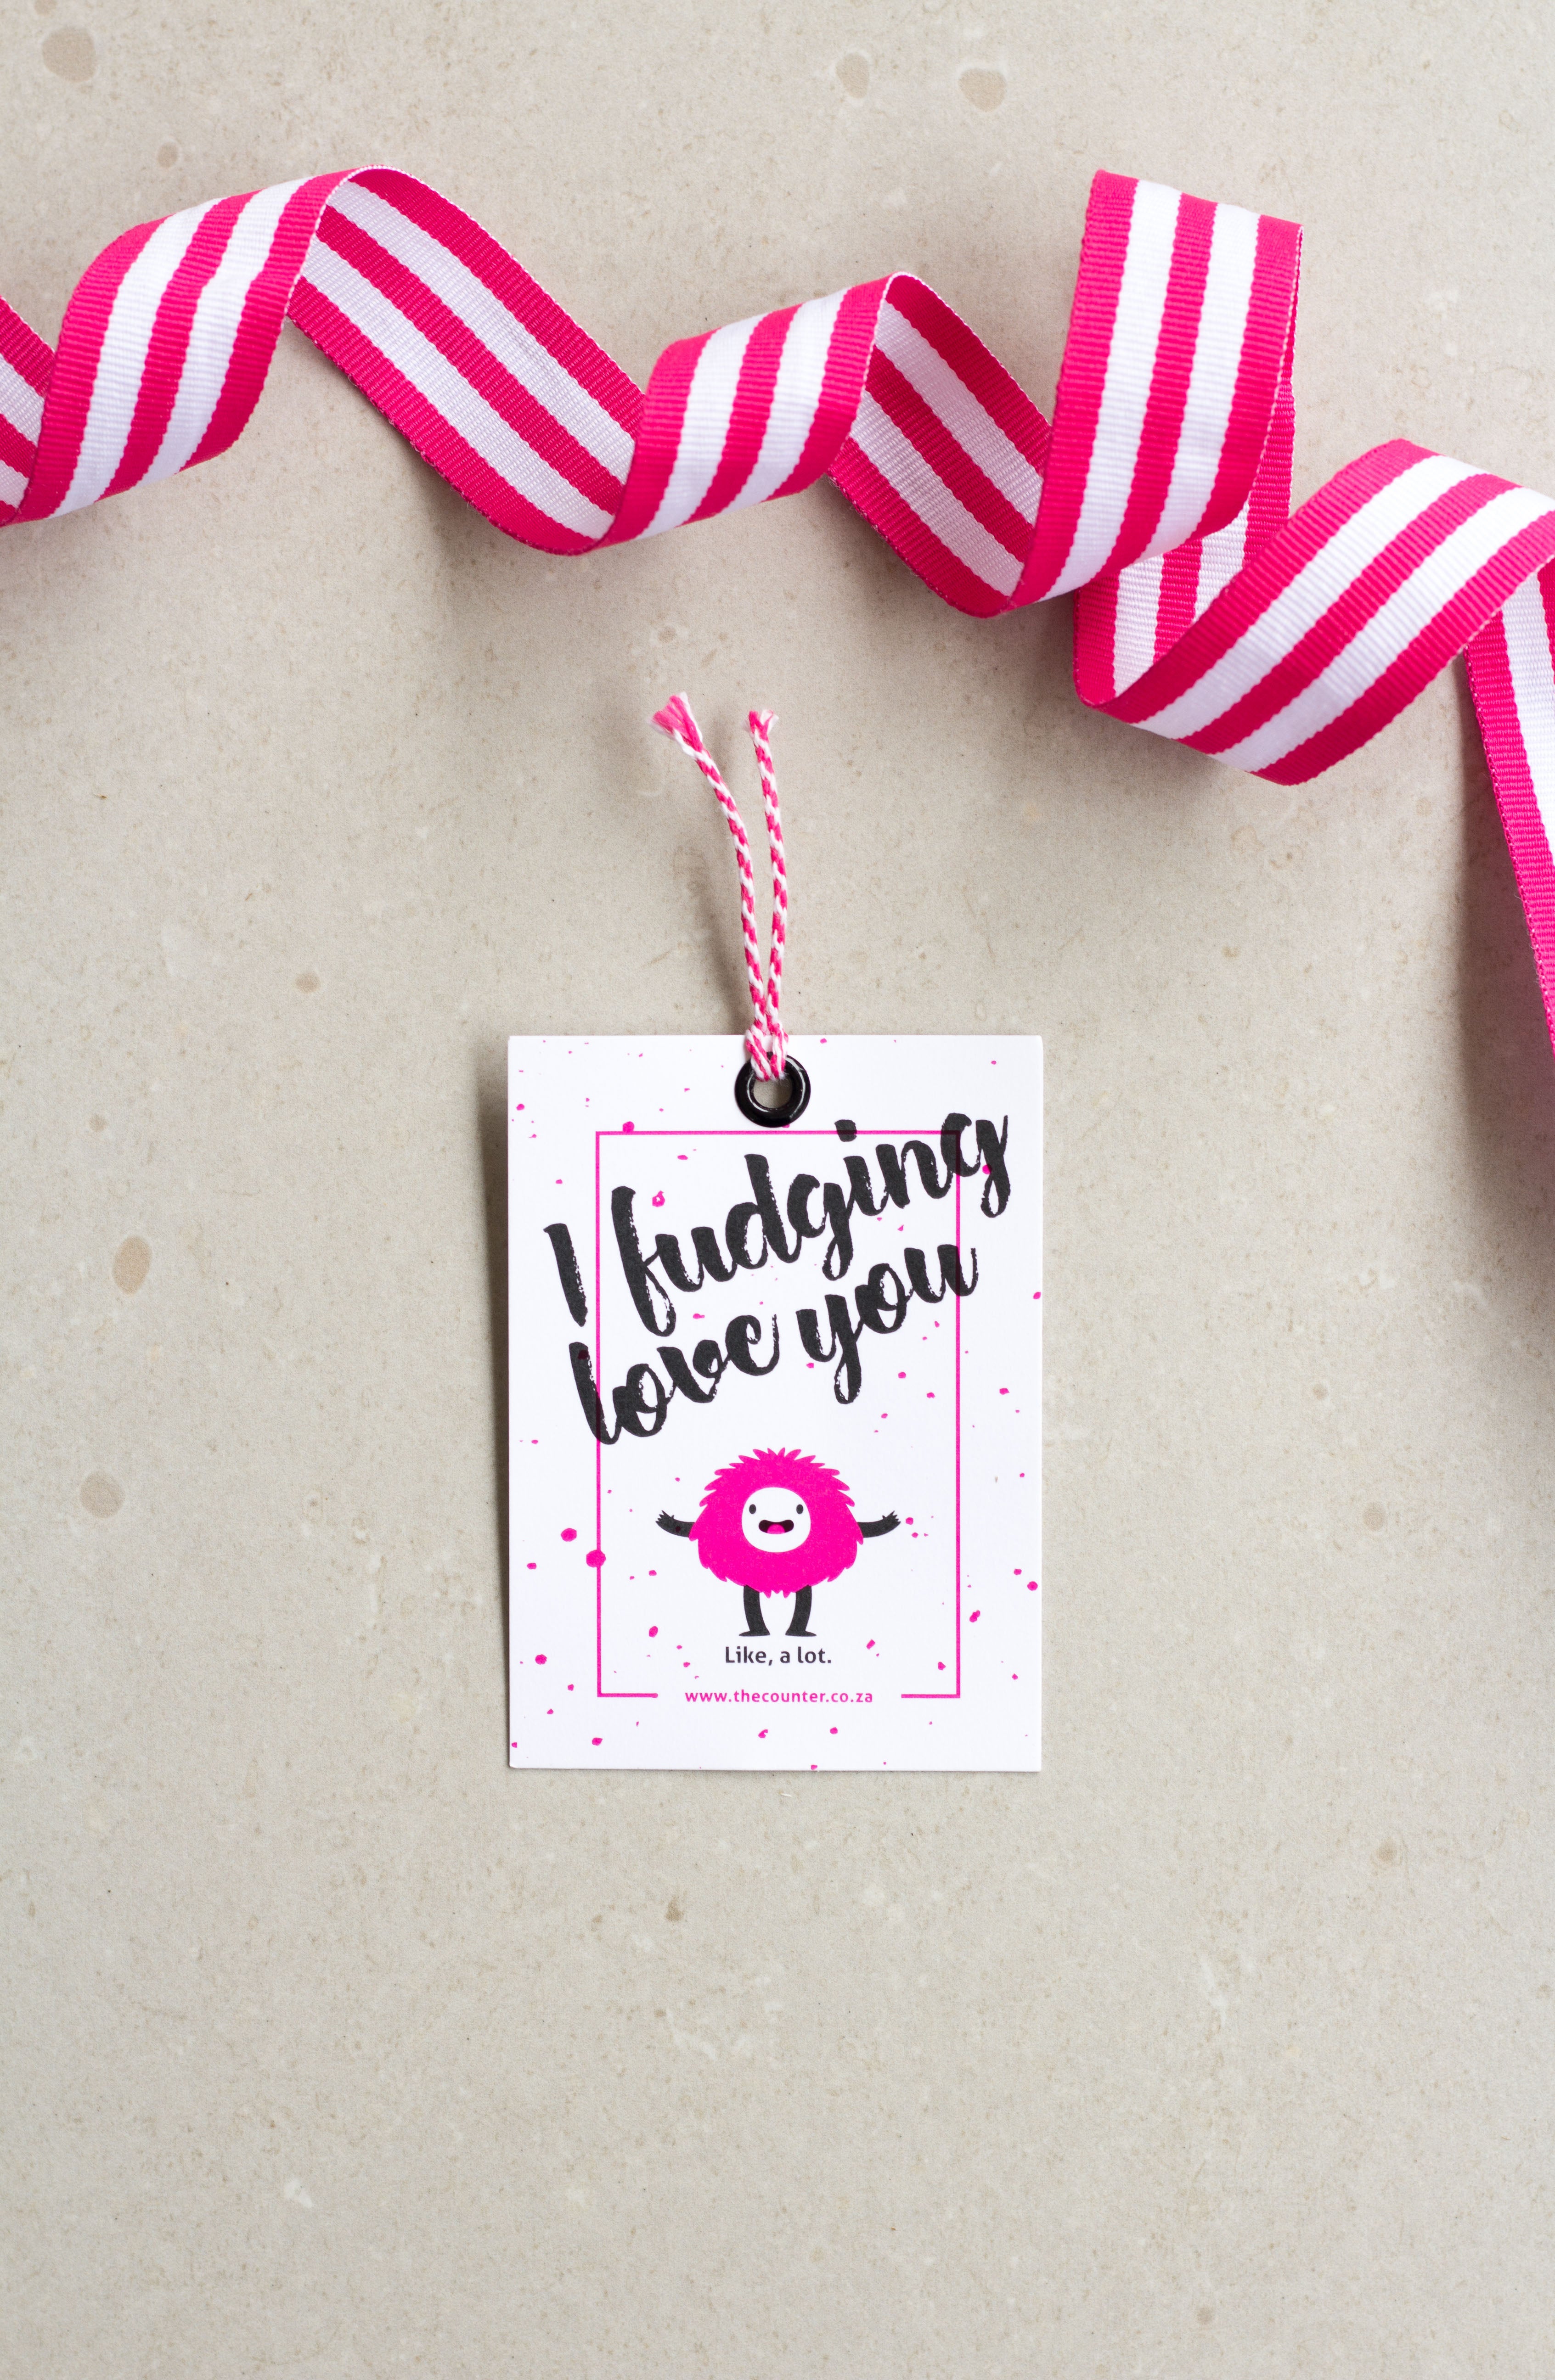 'I Fudging Love You' swing tag with striped pink ribbon